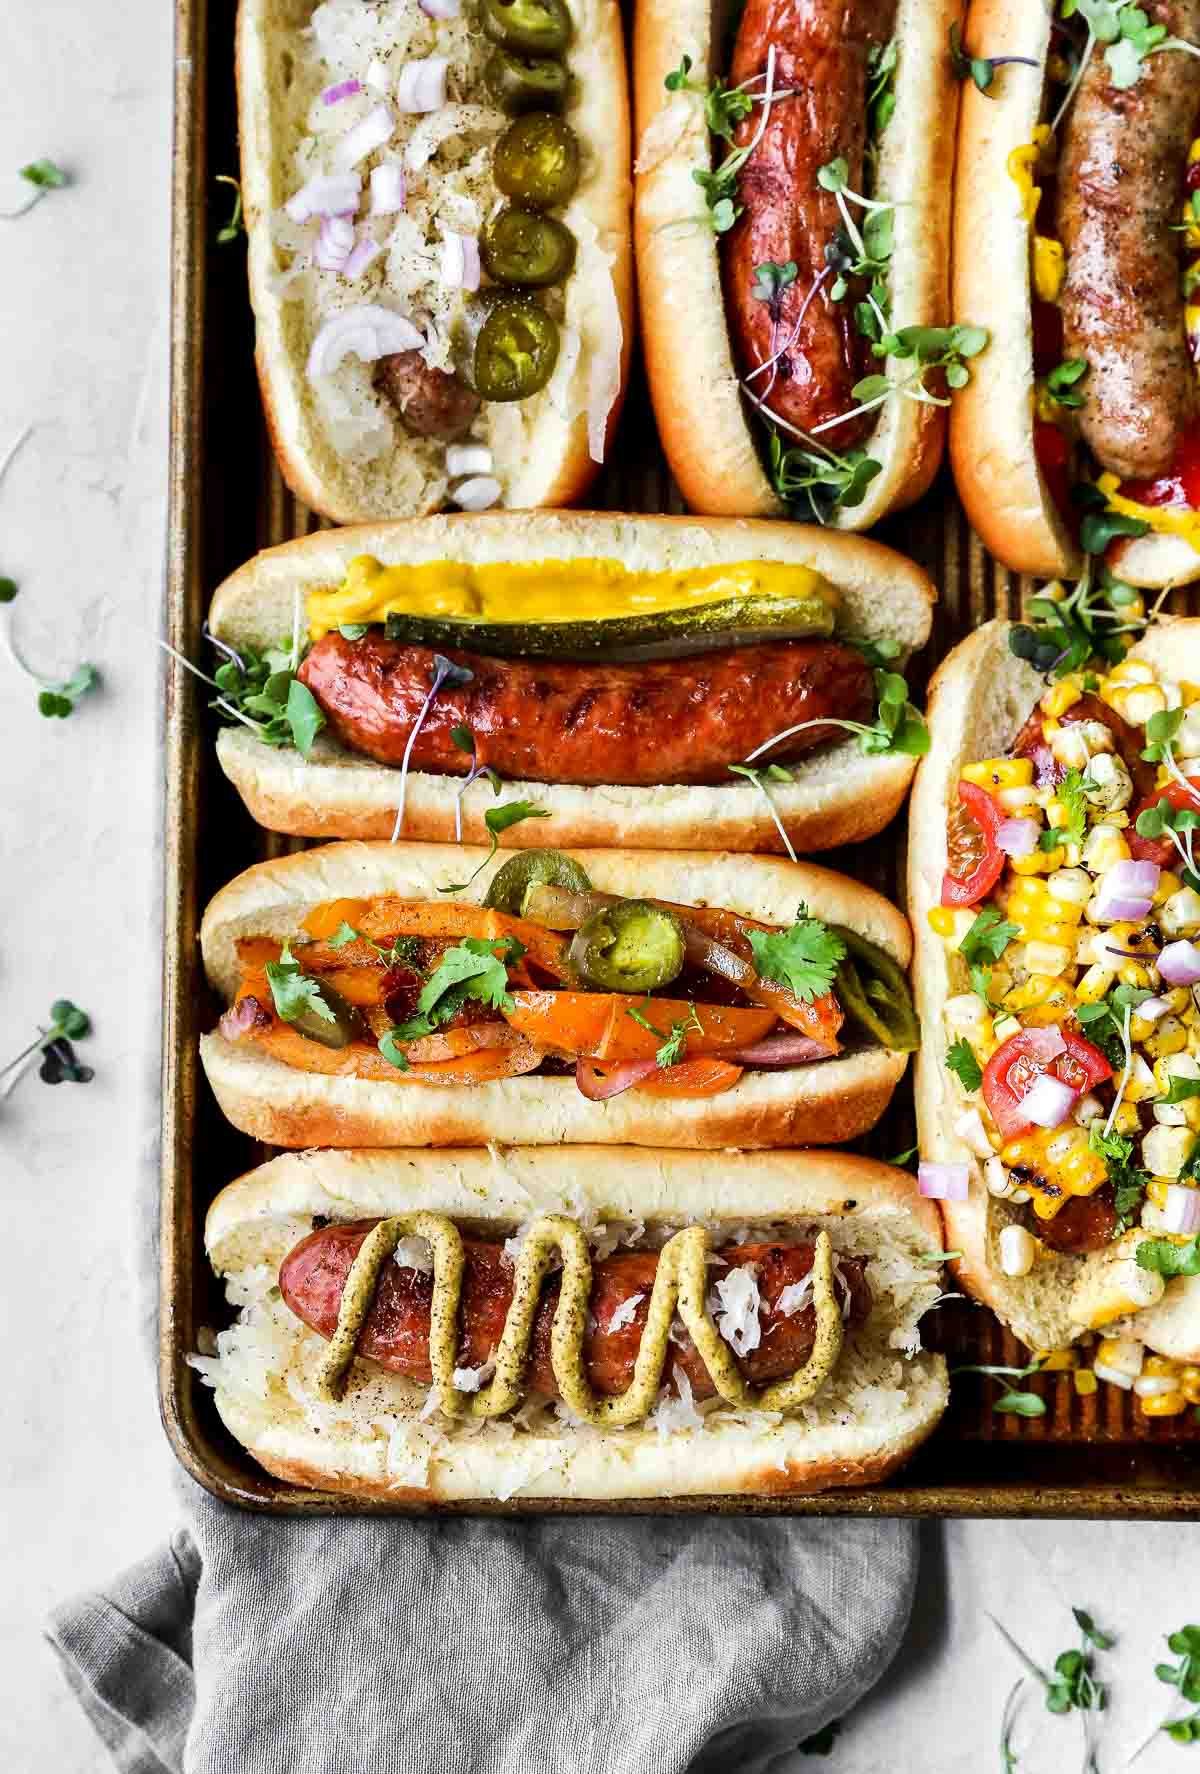 Hot links and beer cheese belong together